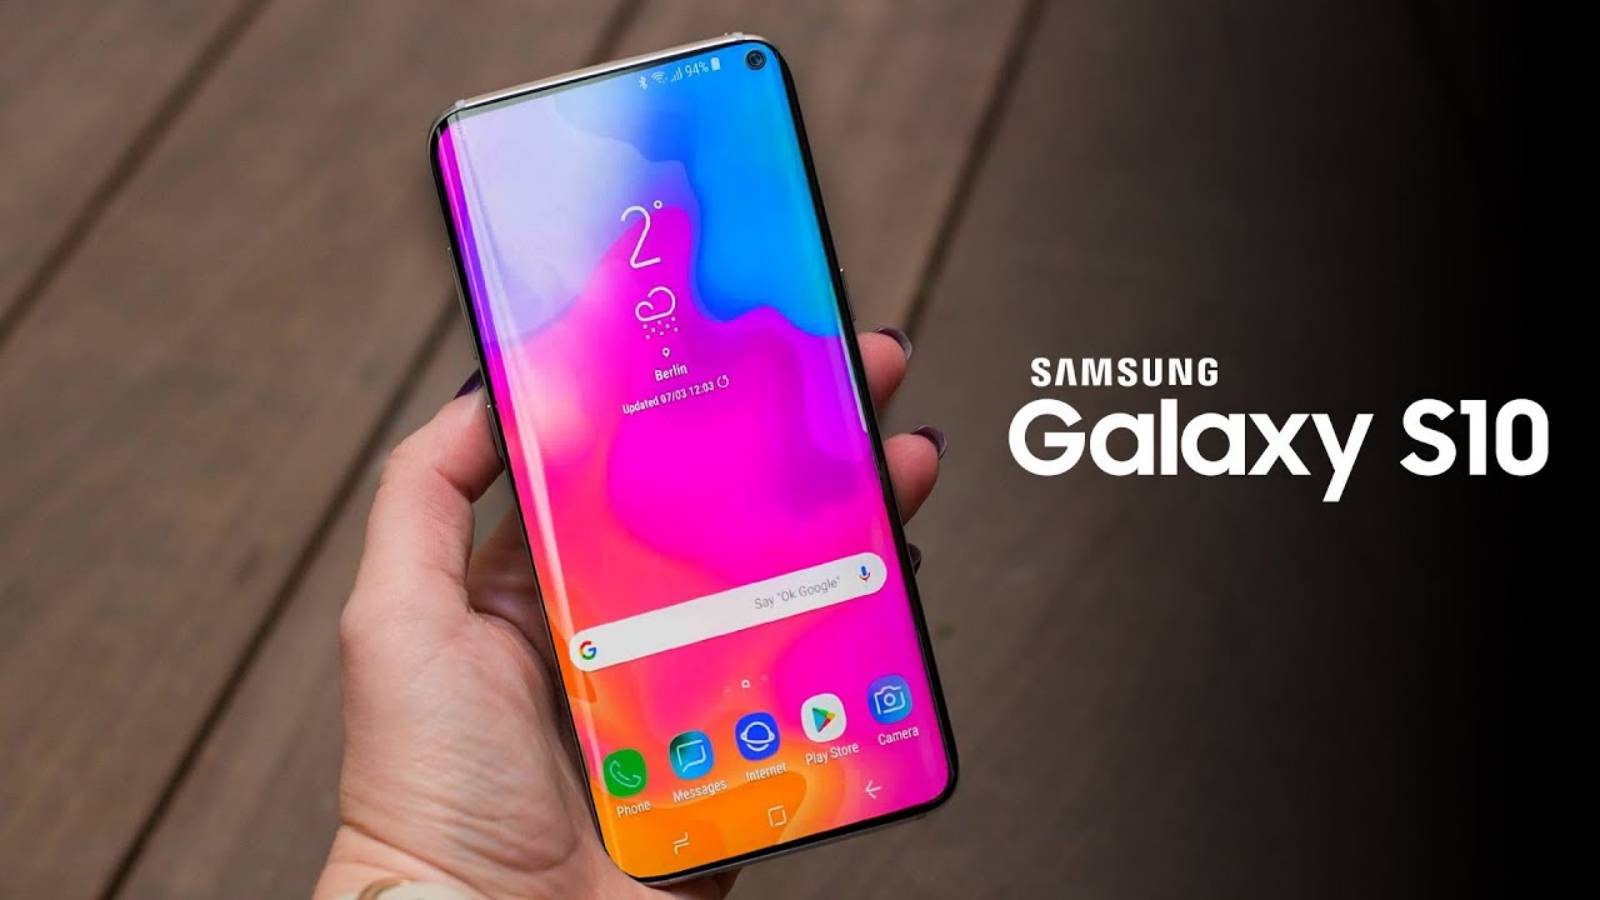 Remise eMAG Samsung GALAXY S10 le 6 juillet